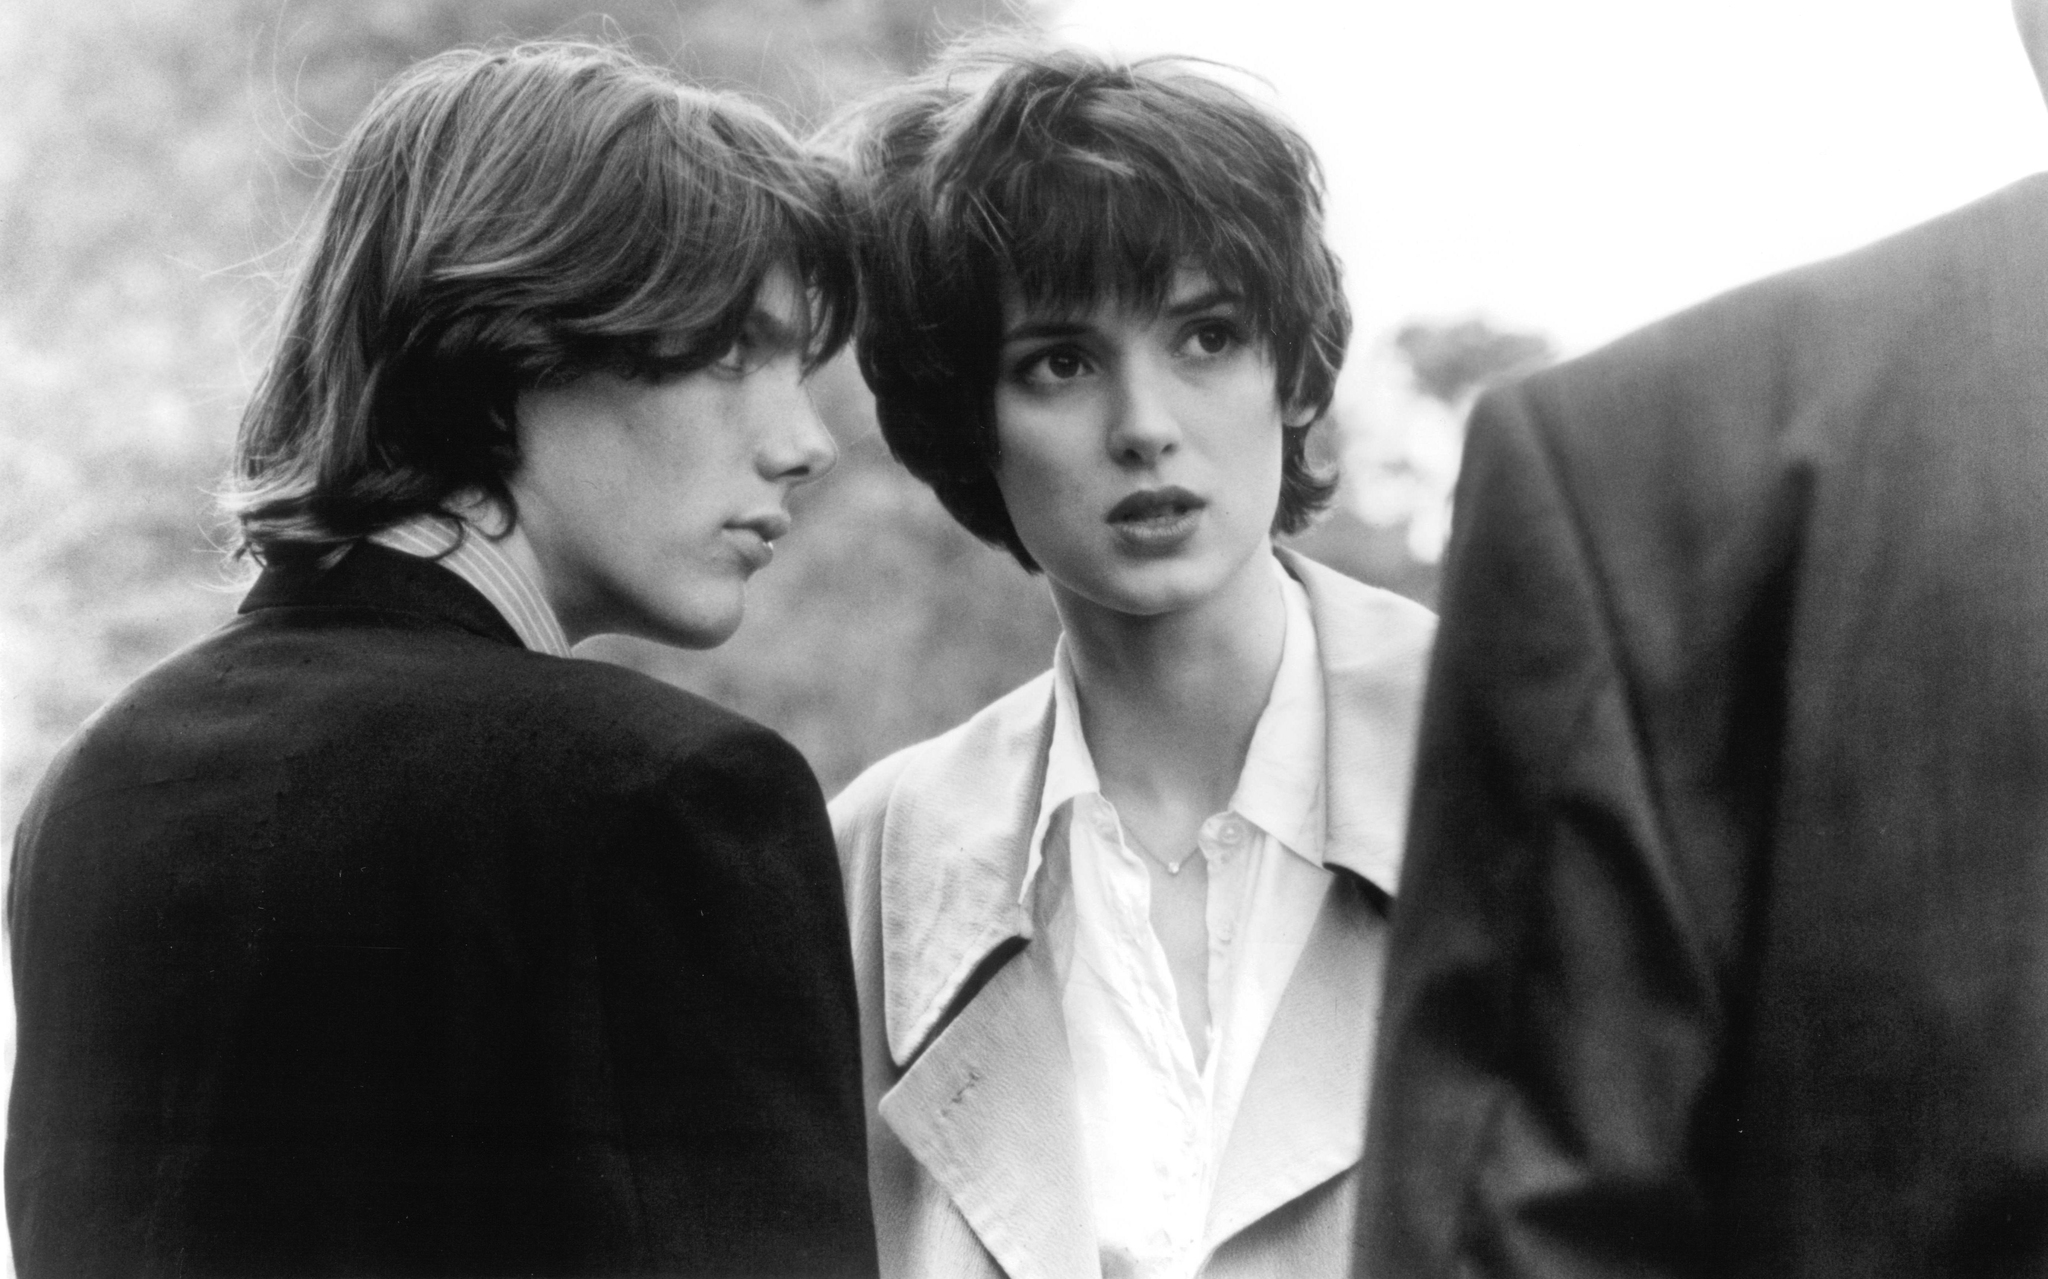 Still of Winona Ryder and Lukas Haas in Boys (1996)